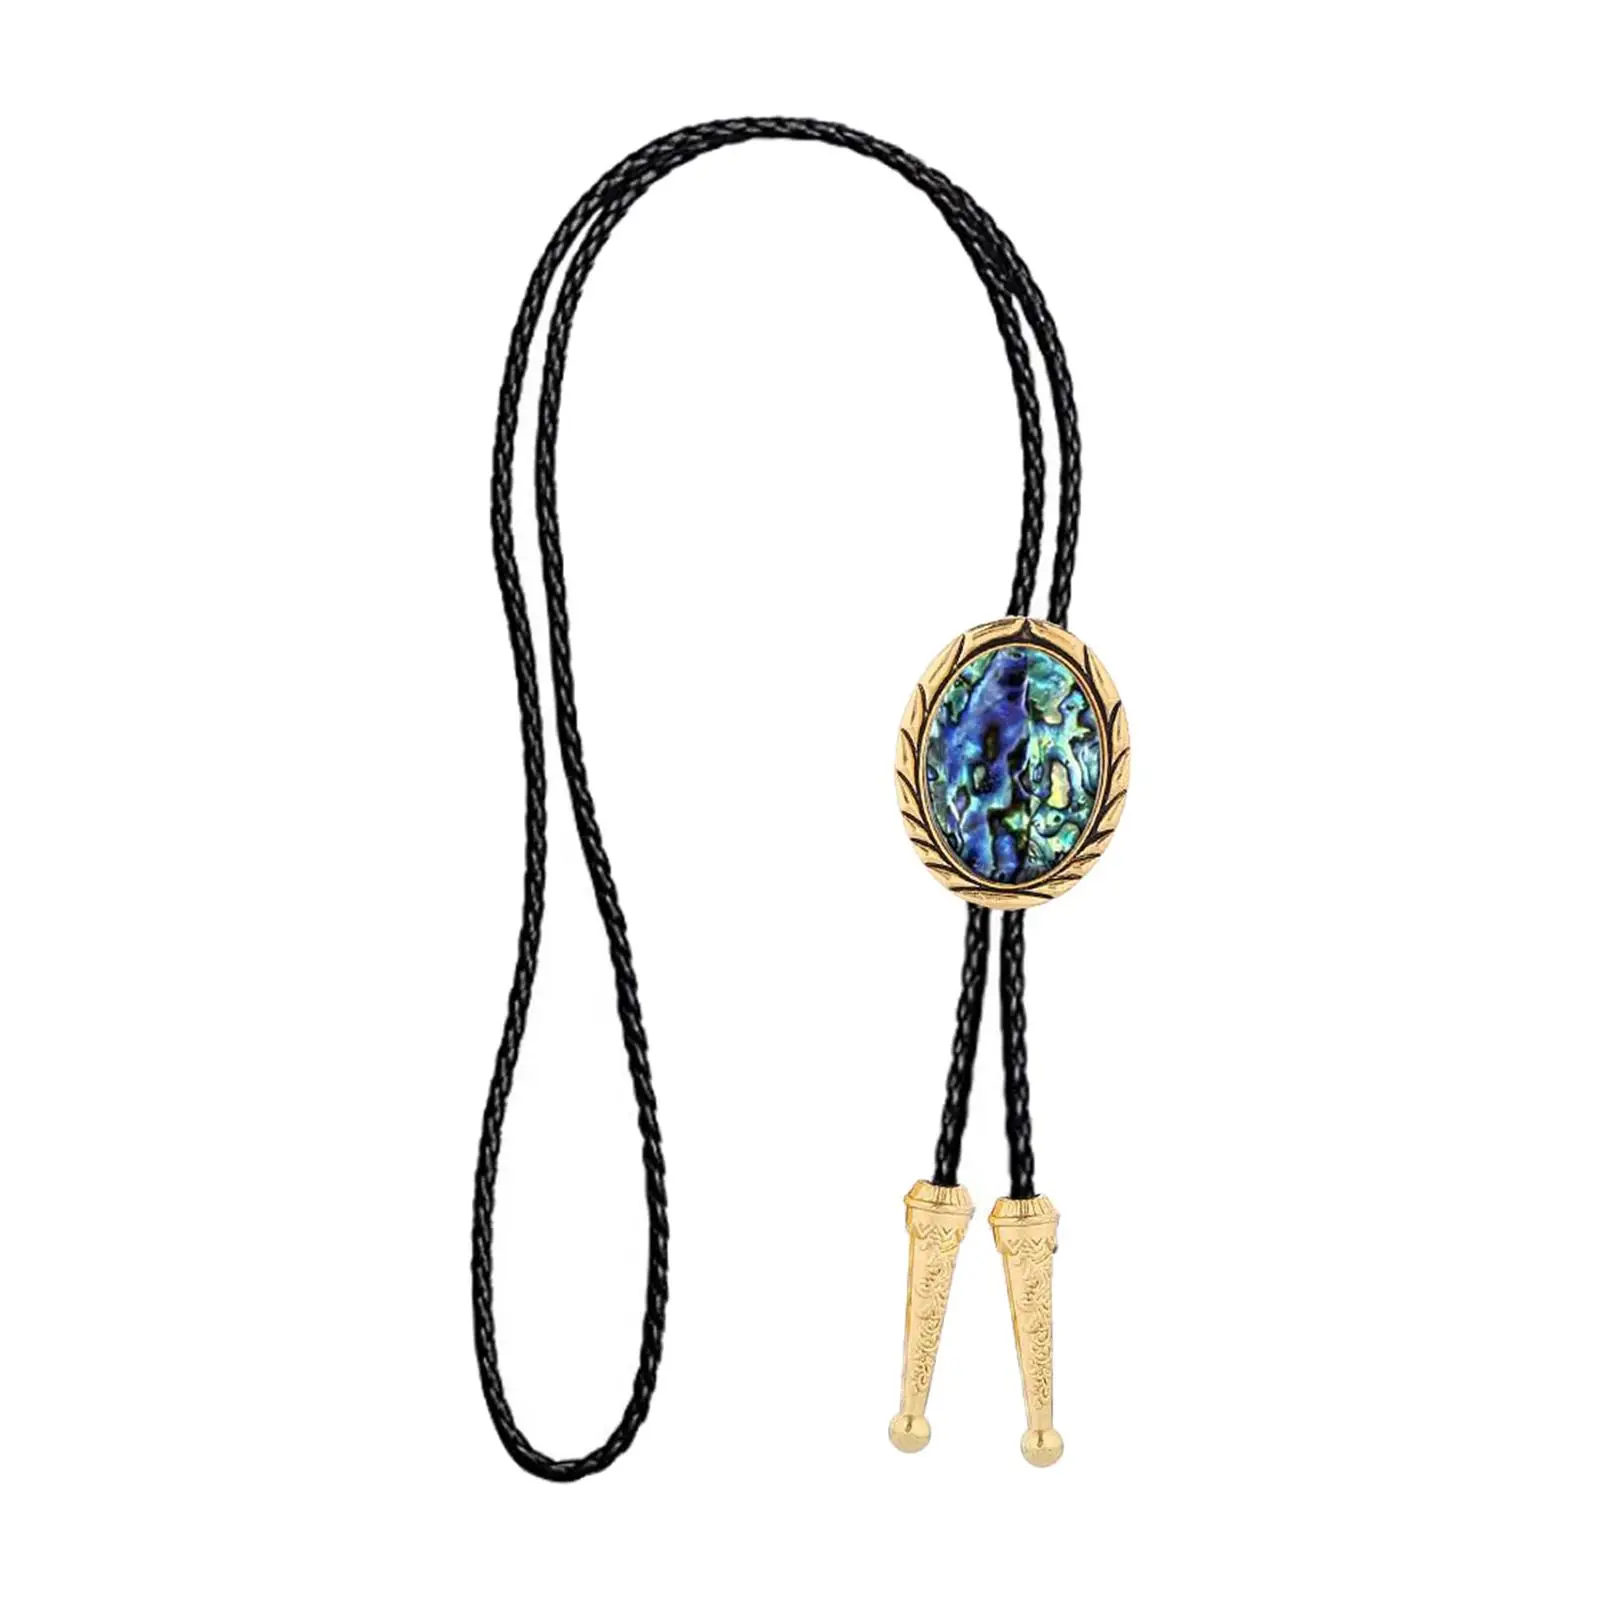 Retro Bolo Tie Western Cowboy PU Leather Cord Necklace Tie Jewelry Costume Accessories for Bridal Unisex Fashion Show Men Prom